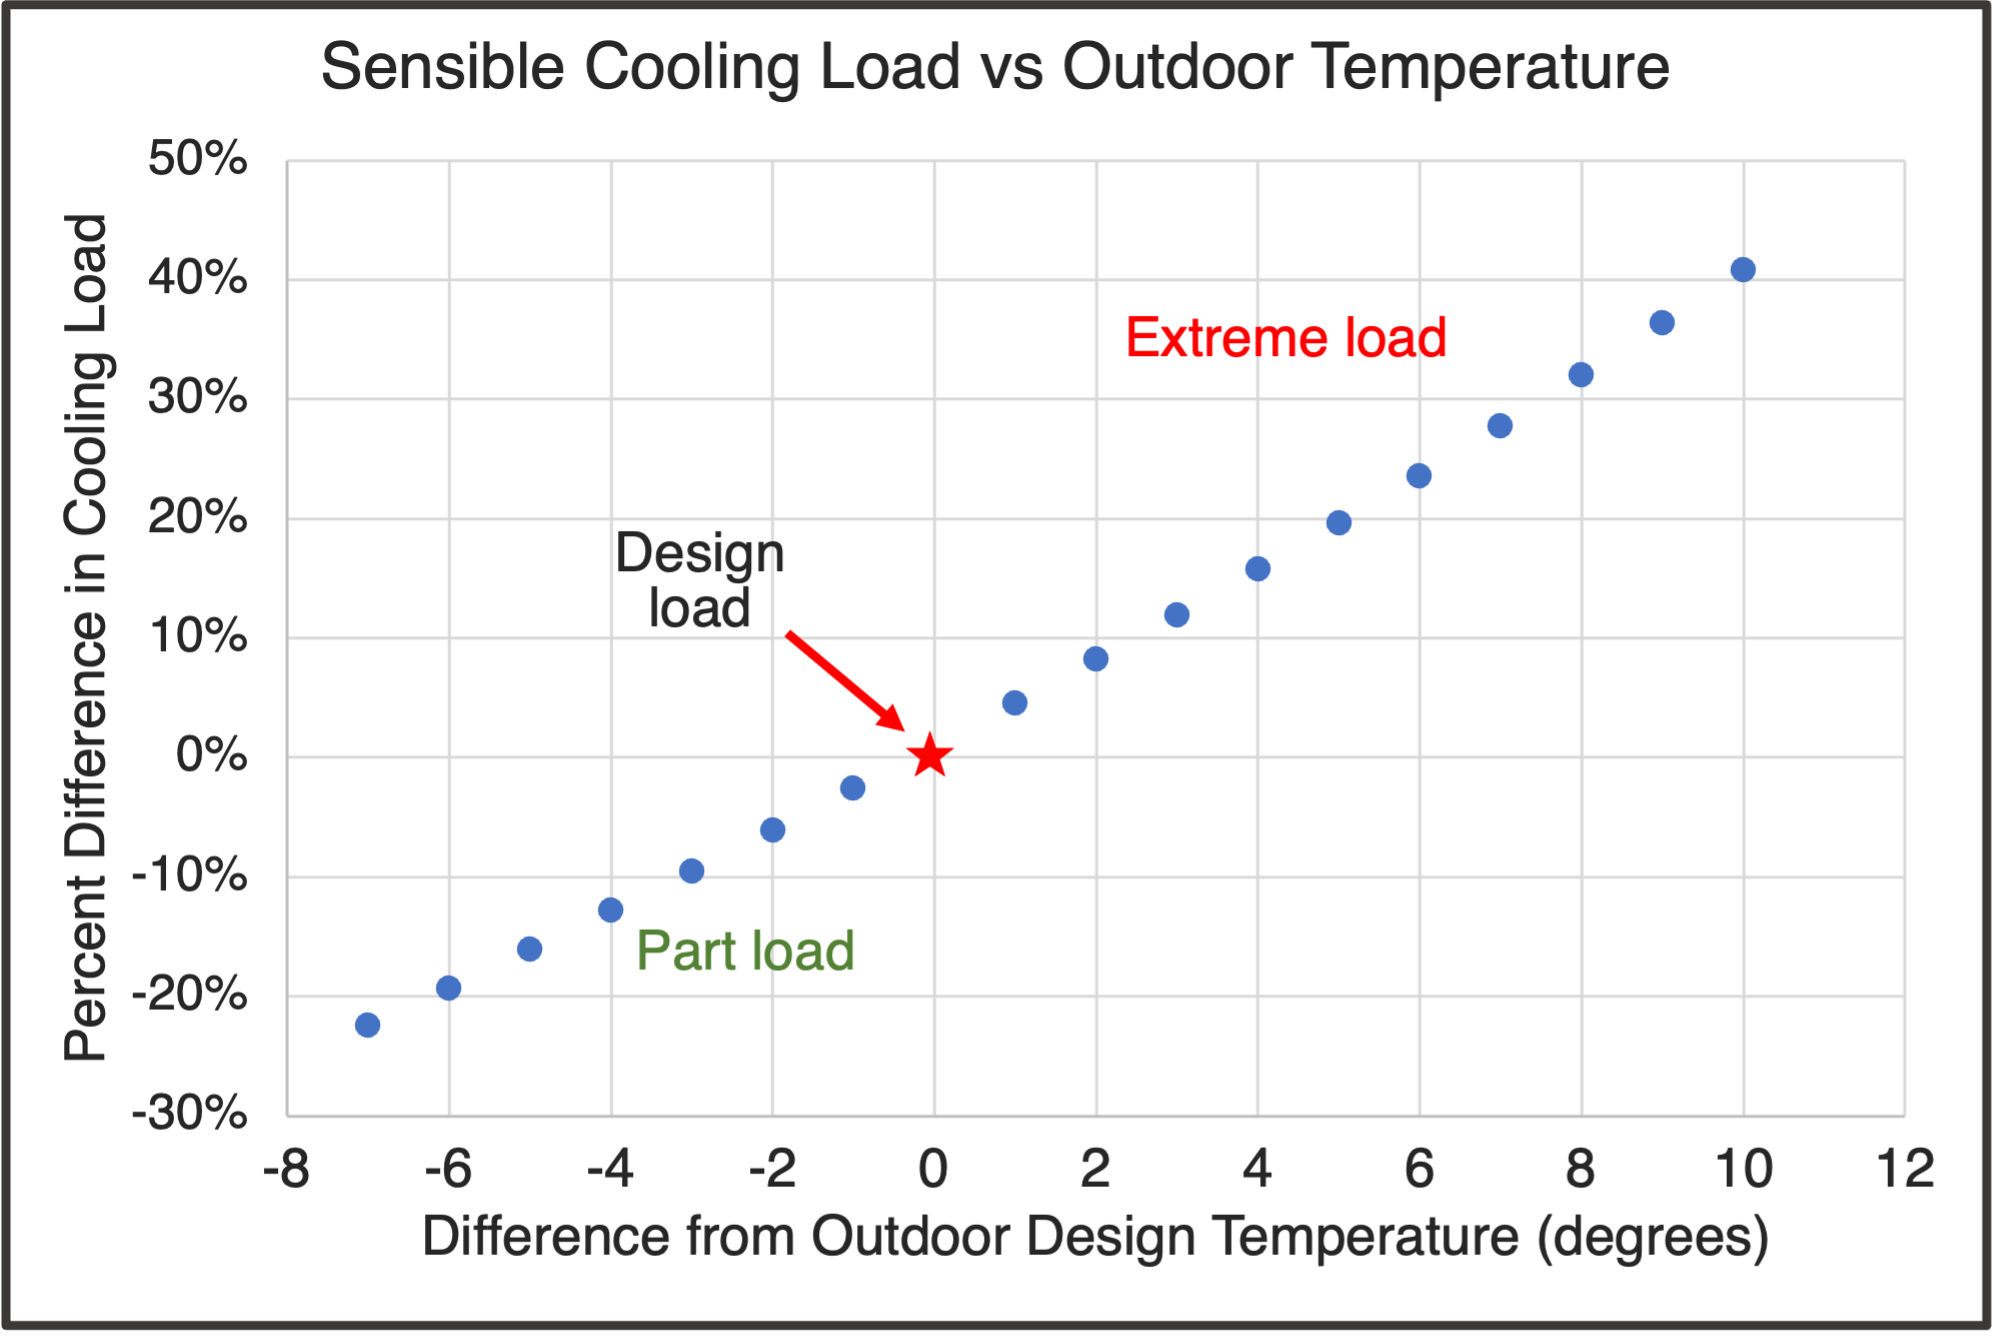 Sensible cooling load versus change in the outdoor dry bulb design temperature